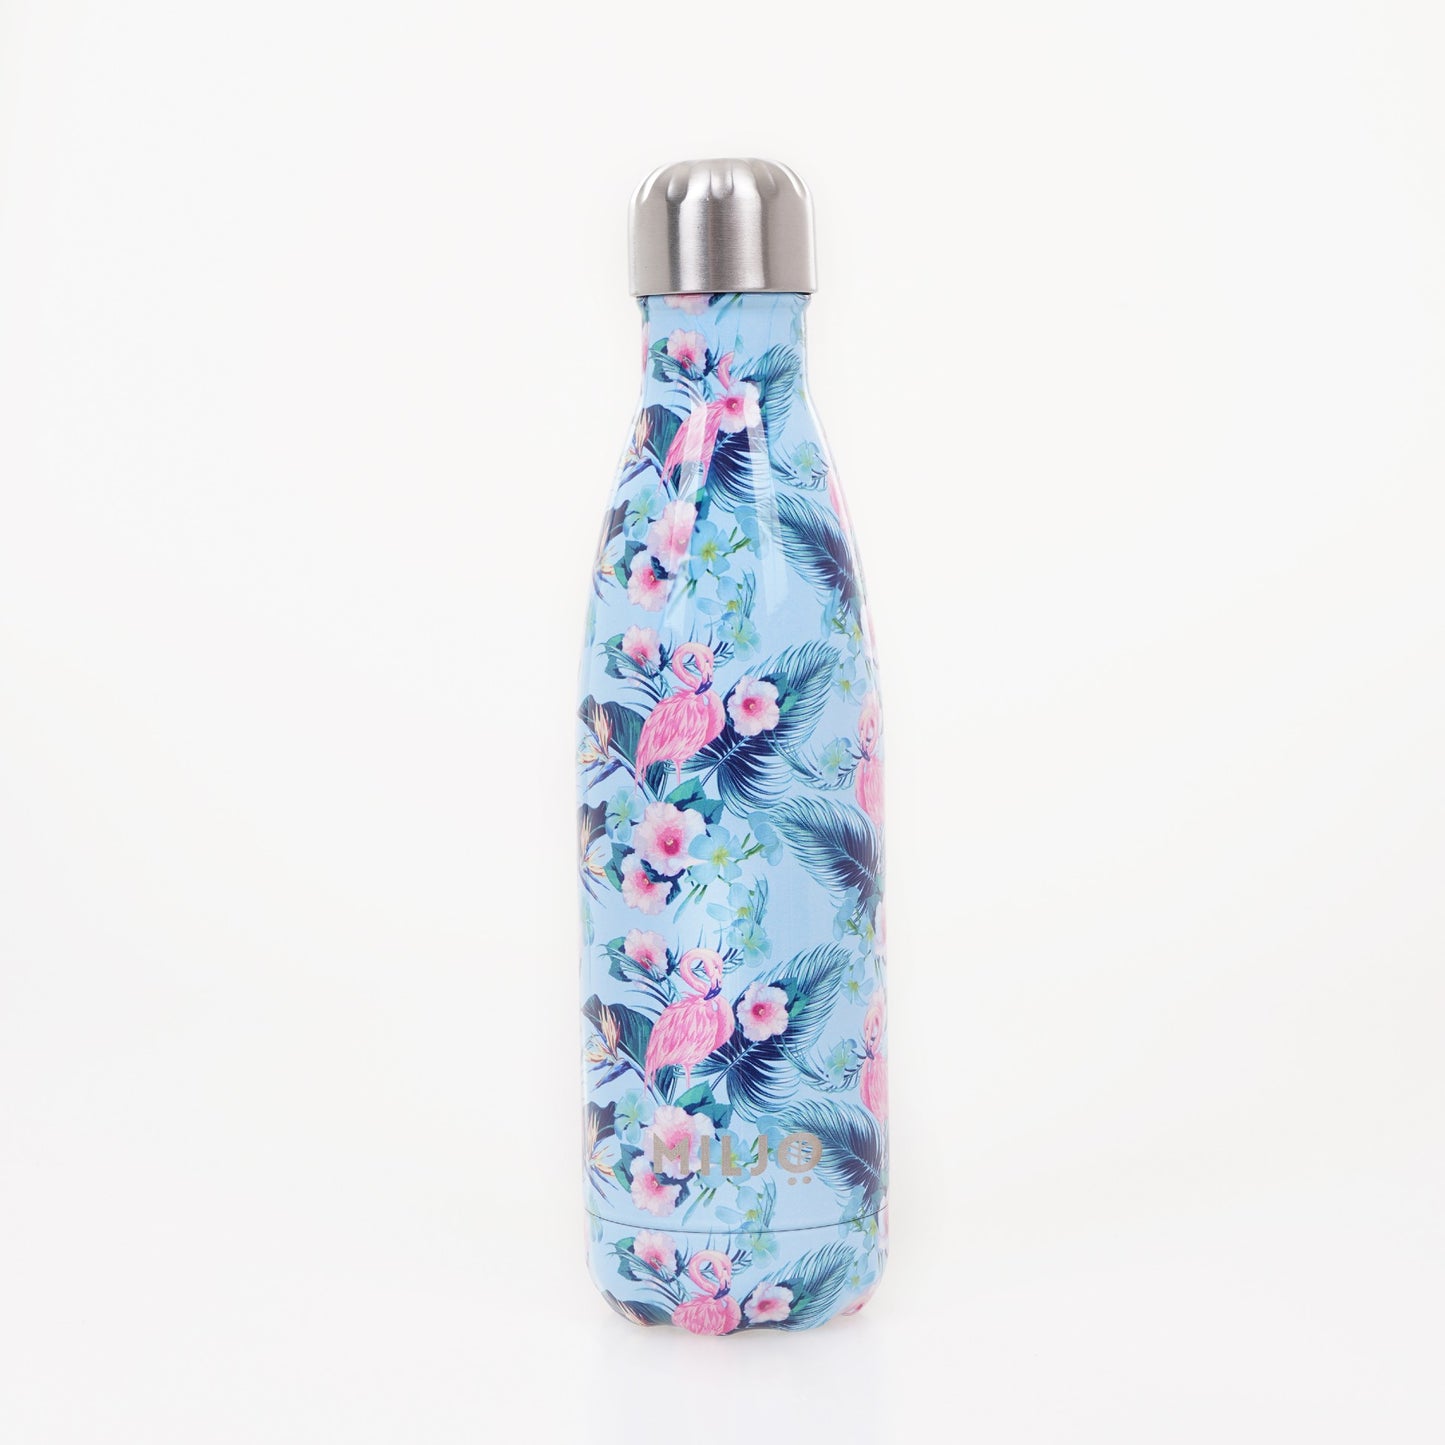 Flamingos and Flowers Reusable Water Bottle 500ml